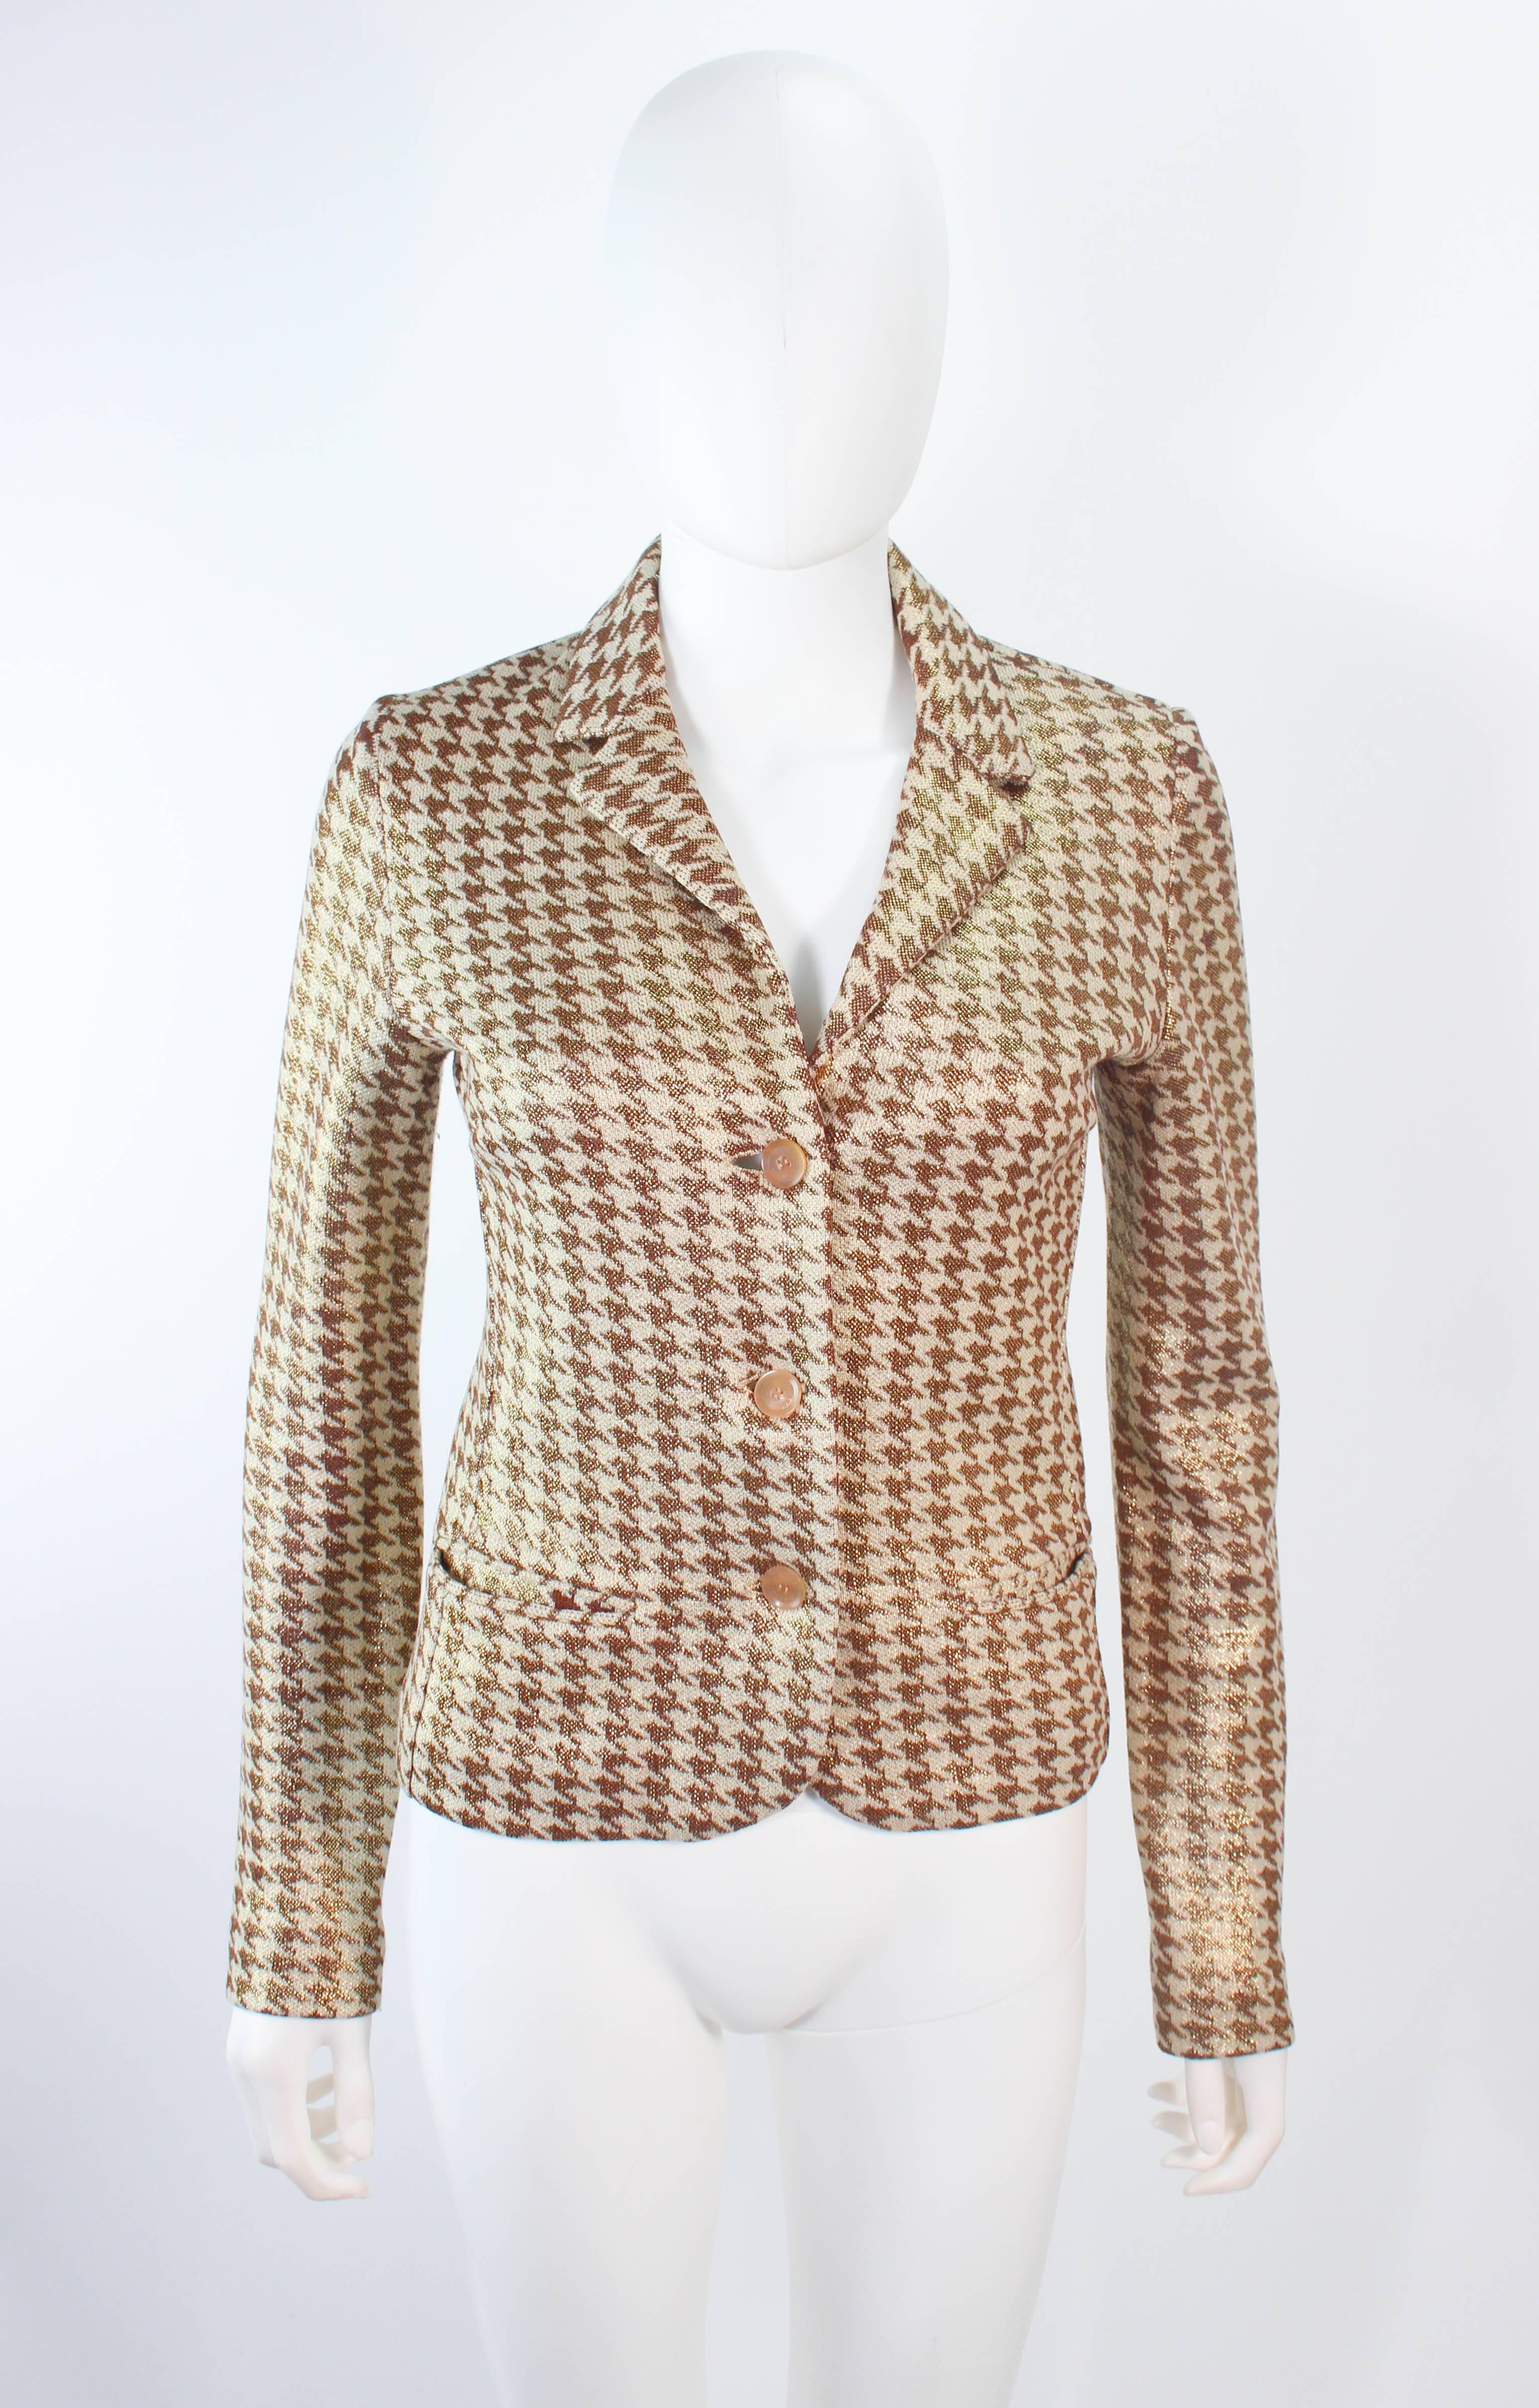 This Missoni blazer is composed of a gold and cream metallic knit with a houndstooth pattern. There are center front button closures with front pockets. In excellent pre-owned condition.

**Please cross-reference measurements for personal accuracy.